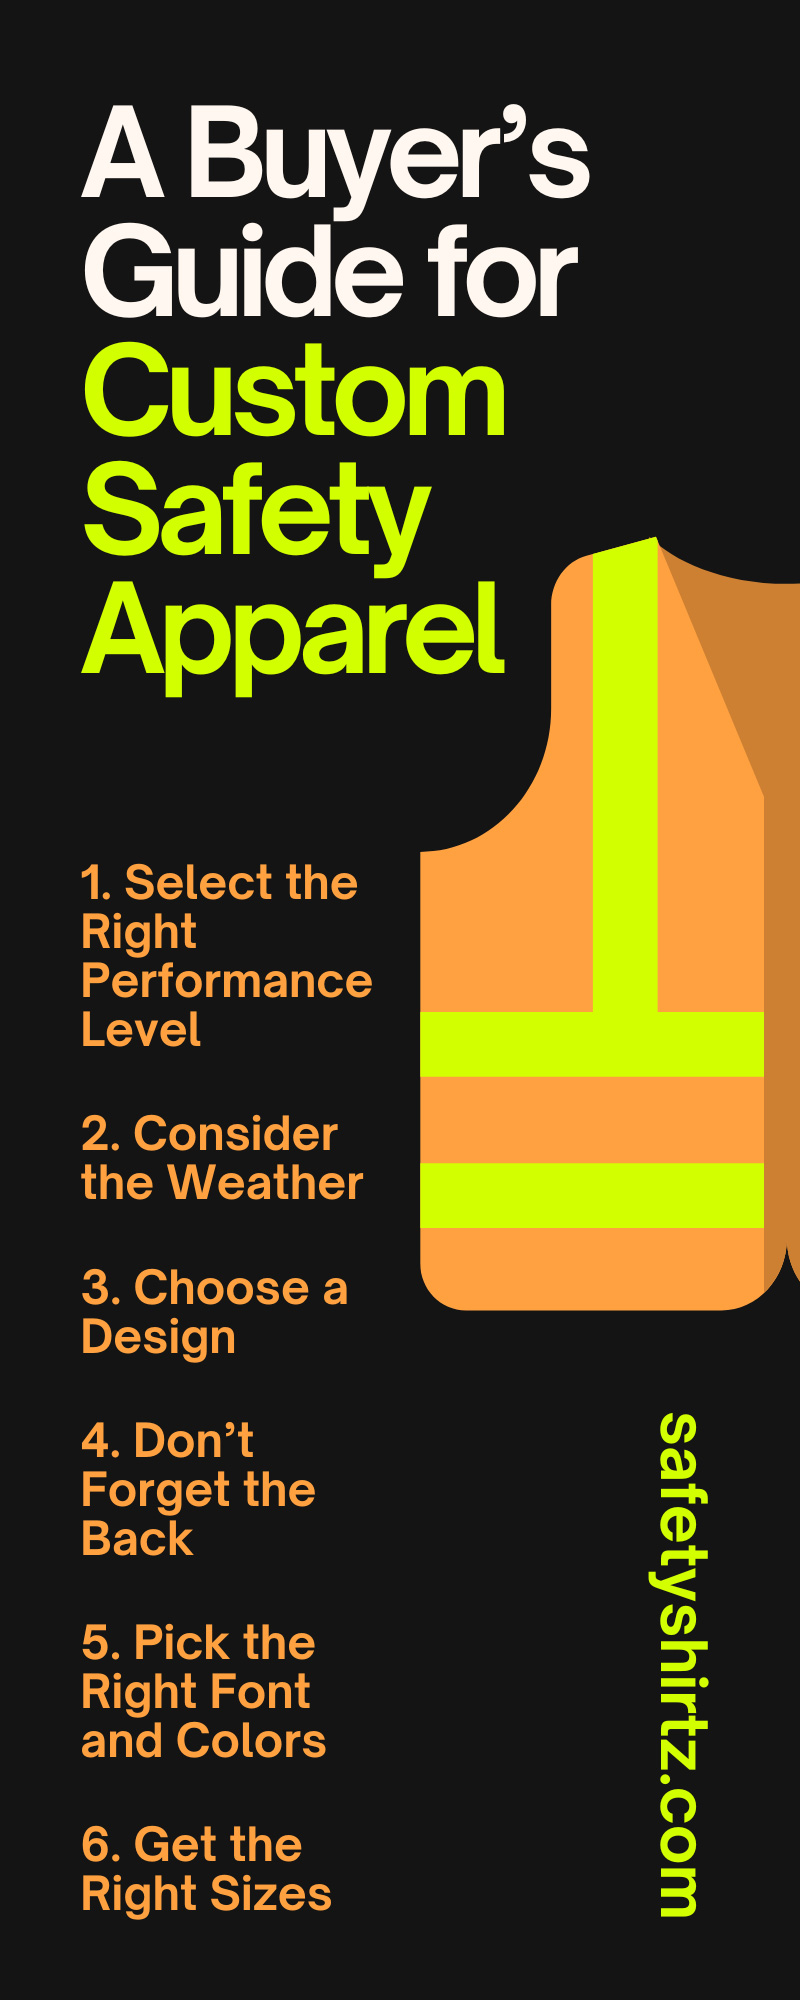 A Buyer’s Guide for Custom Safety Apparel